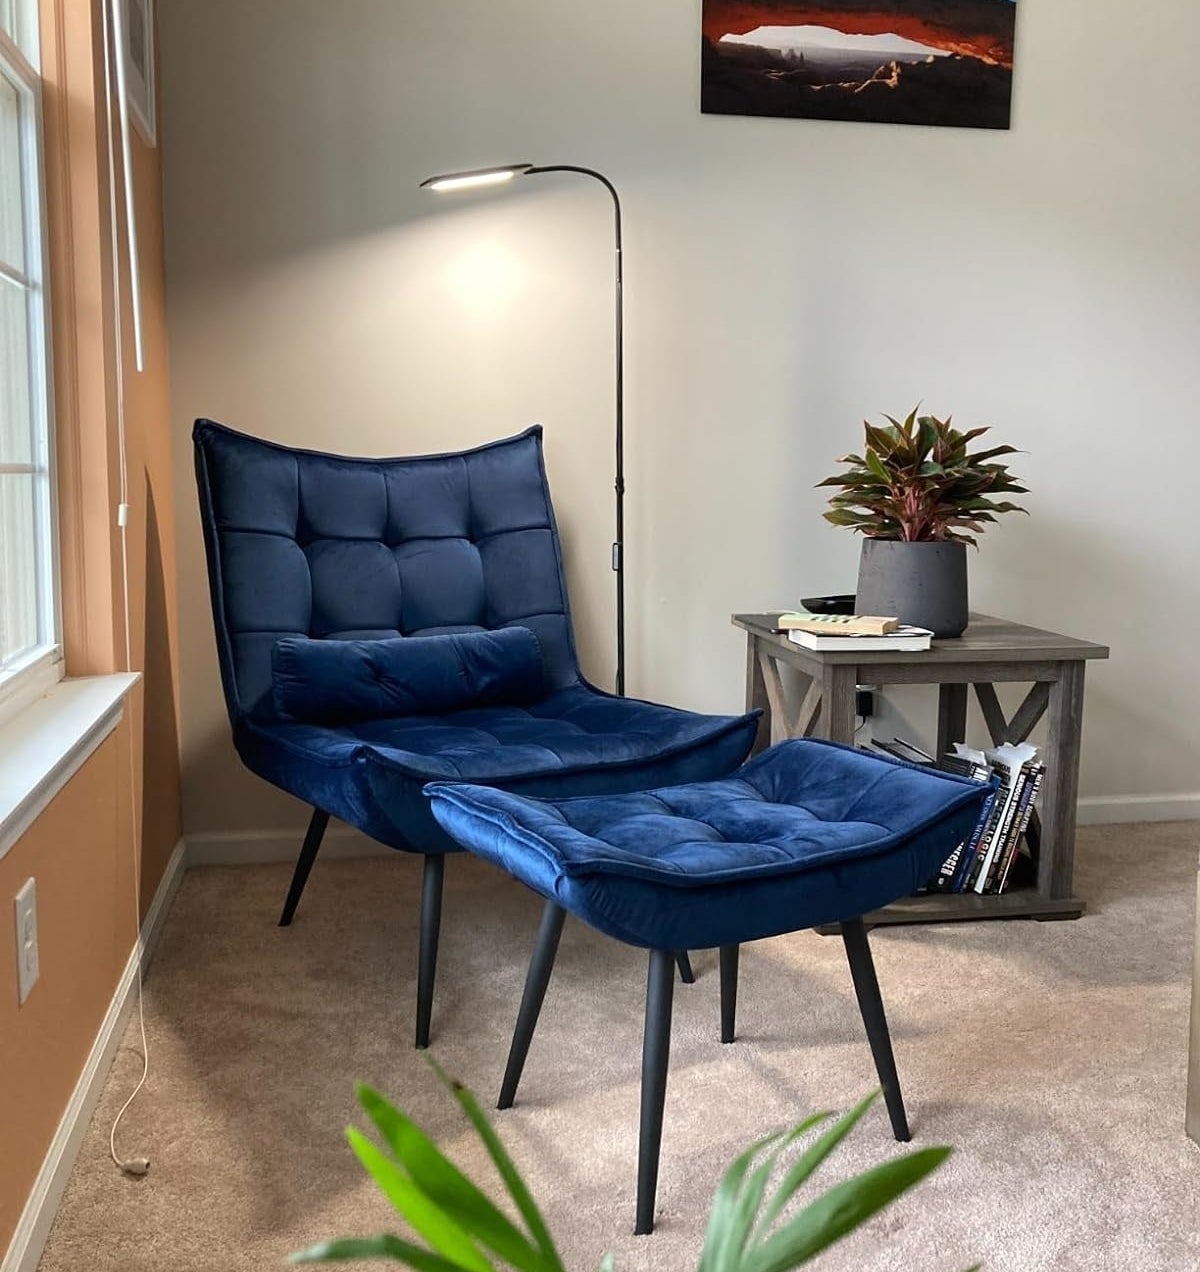 A cozy reading nook with an adjustable floor lamp and a tufted blue lounge chair next to a wooden side table with a plant